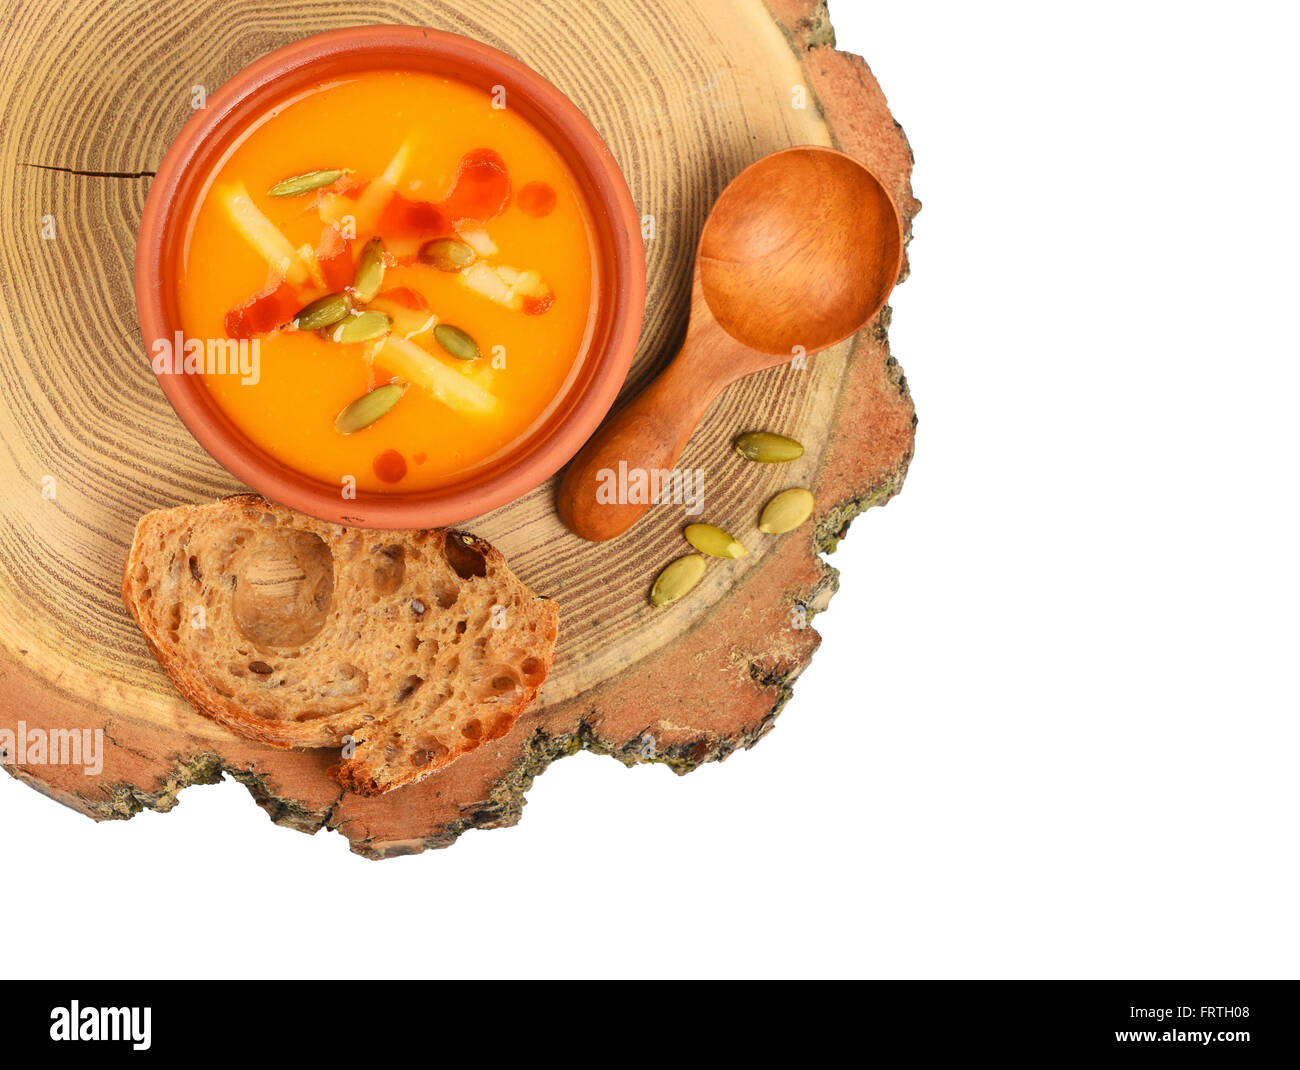 Small ceramic bowl of pumpkin cream soup, wooden spoon, slice of bread and seeds on wood cut isolated on white background, top v Stock Photo